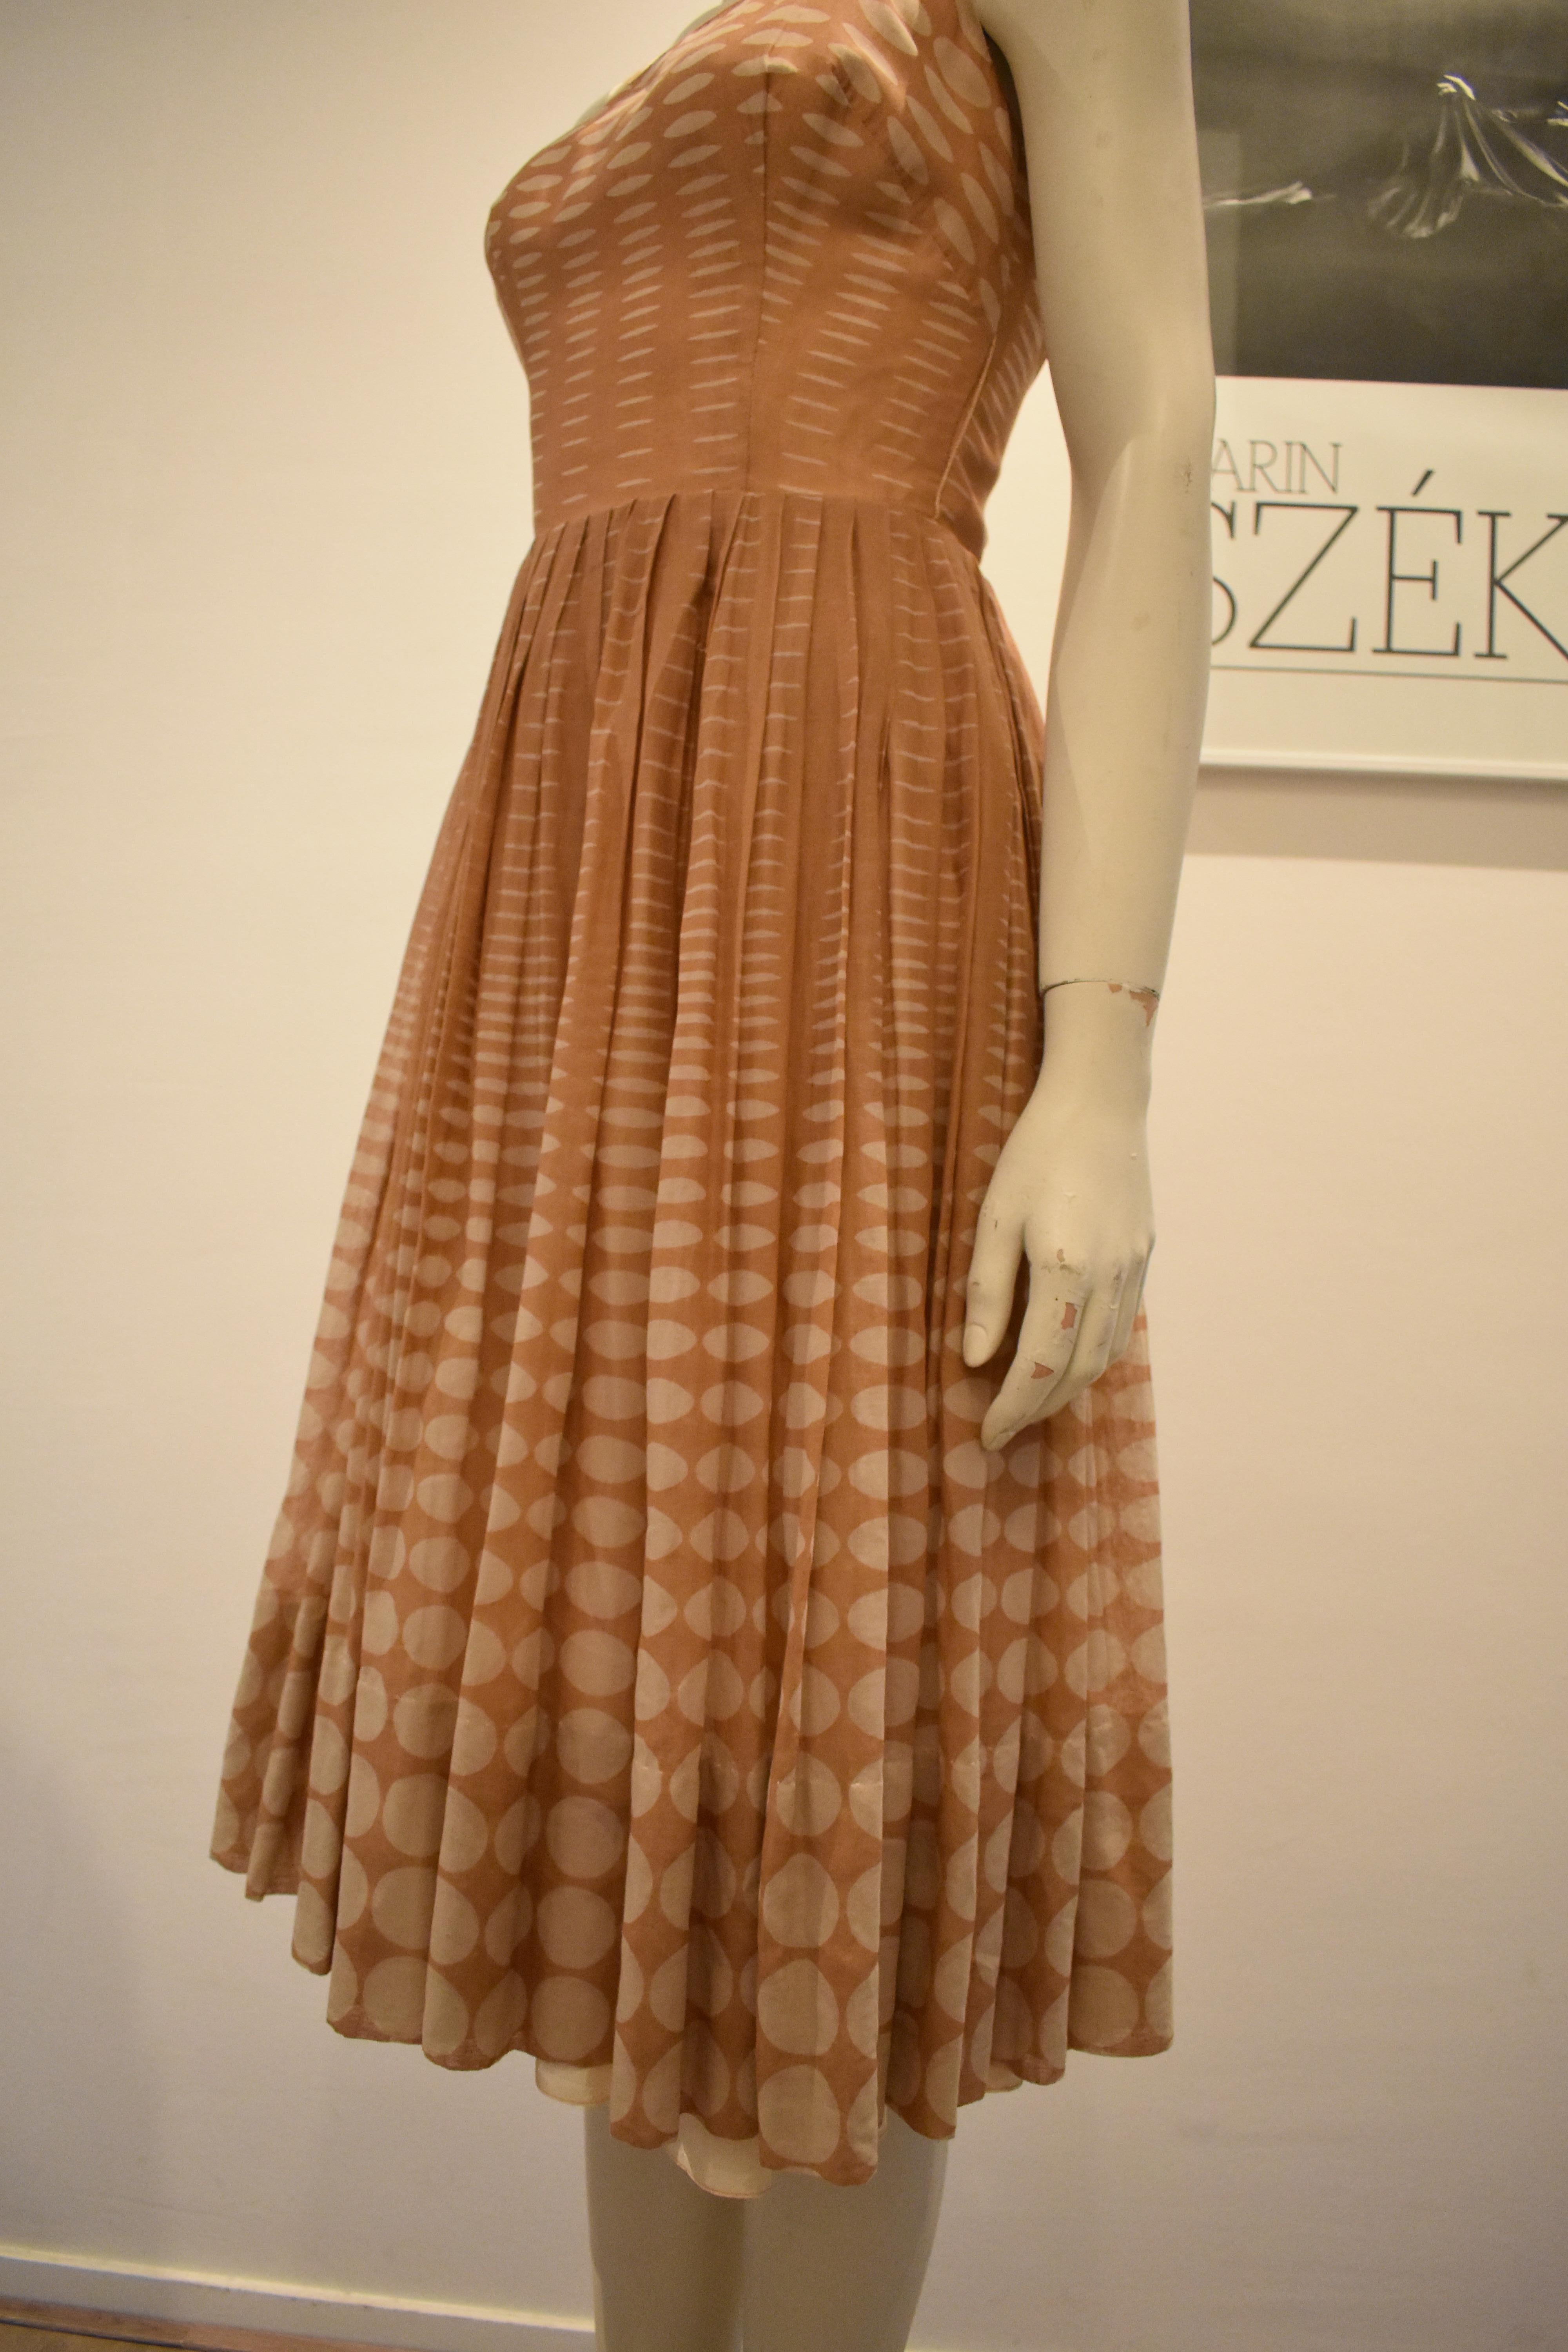 Vintage 1950s Batiste Handmade Dress with a Flowy Pleated Skirt In Good Condition For Sale In Amsterdam, NL